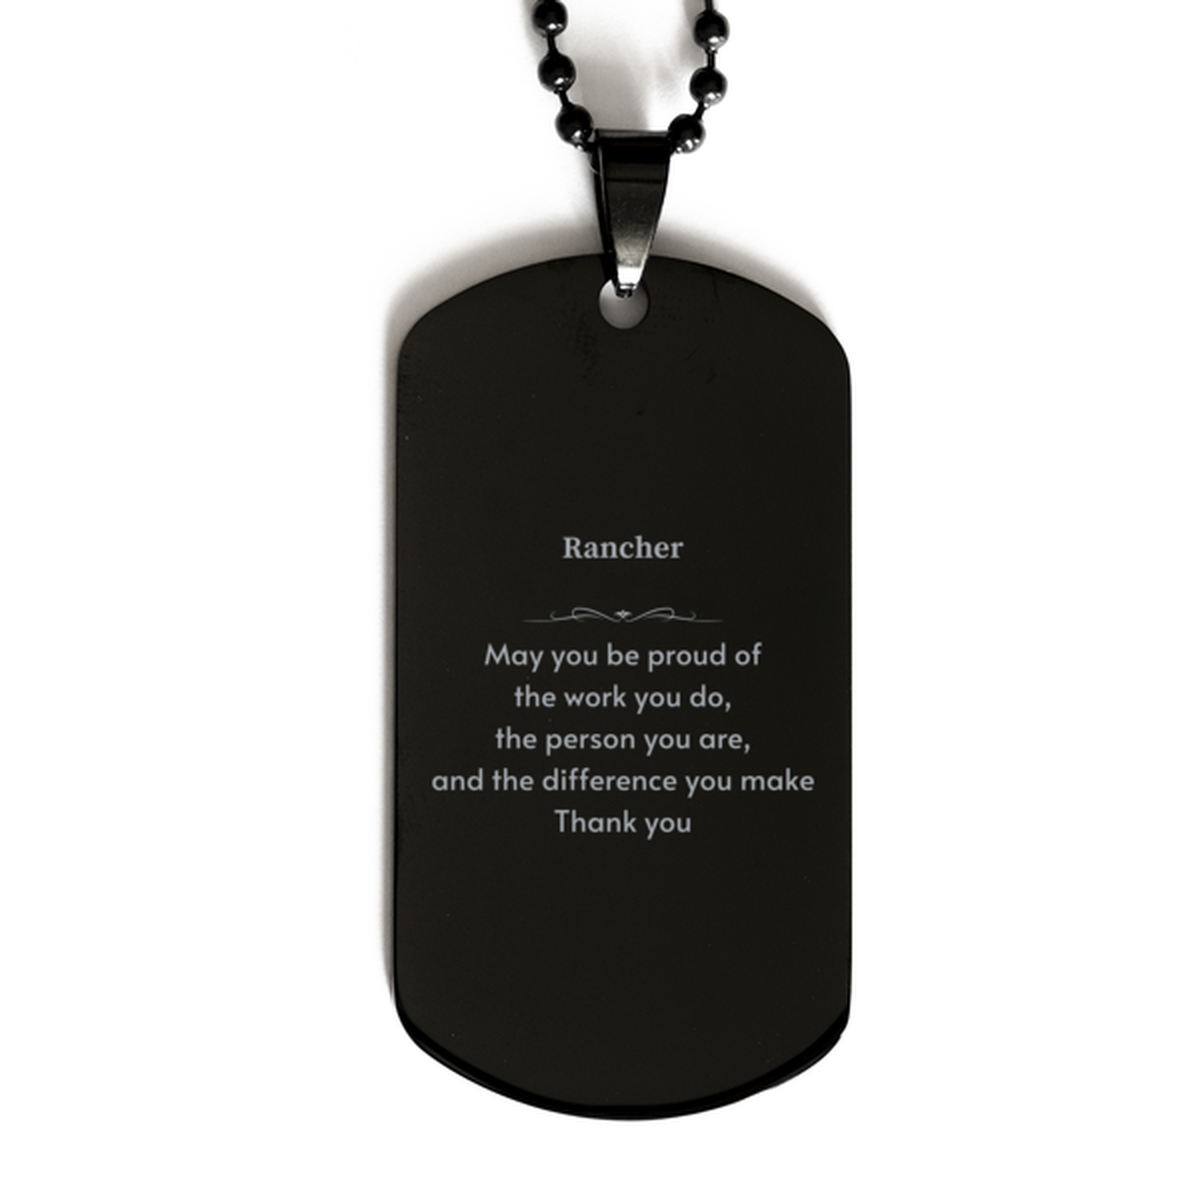 Heartwarming Black Dog Tag Retirement Coworkers Gifts for Rancher, Rancher May You be proud of the work you do, the person you are Gifts for Boss Men Women Friends